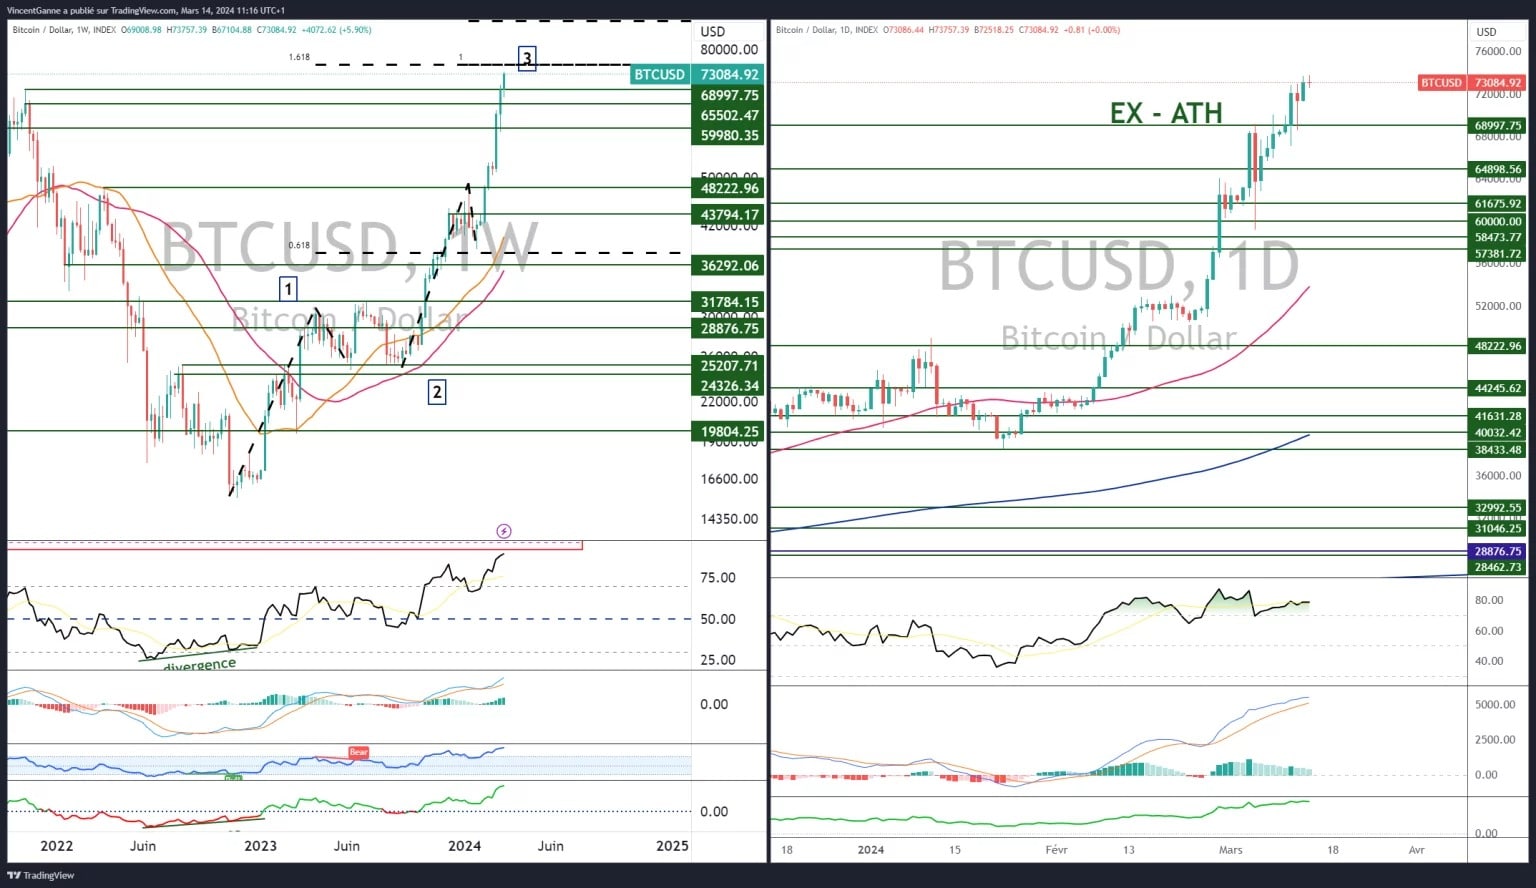 Chart showing weekly (left) and daily (right) Japanese candlicks for BTC/USD